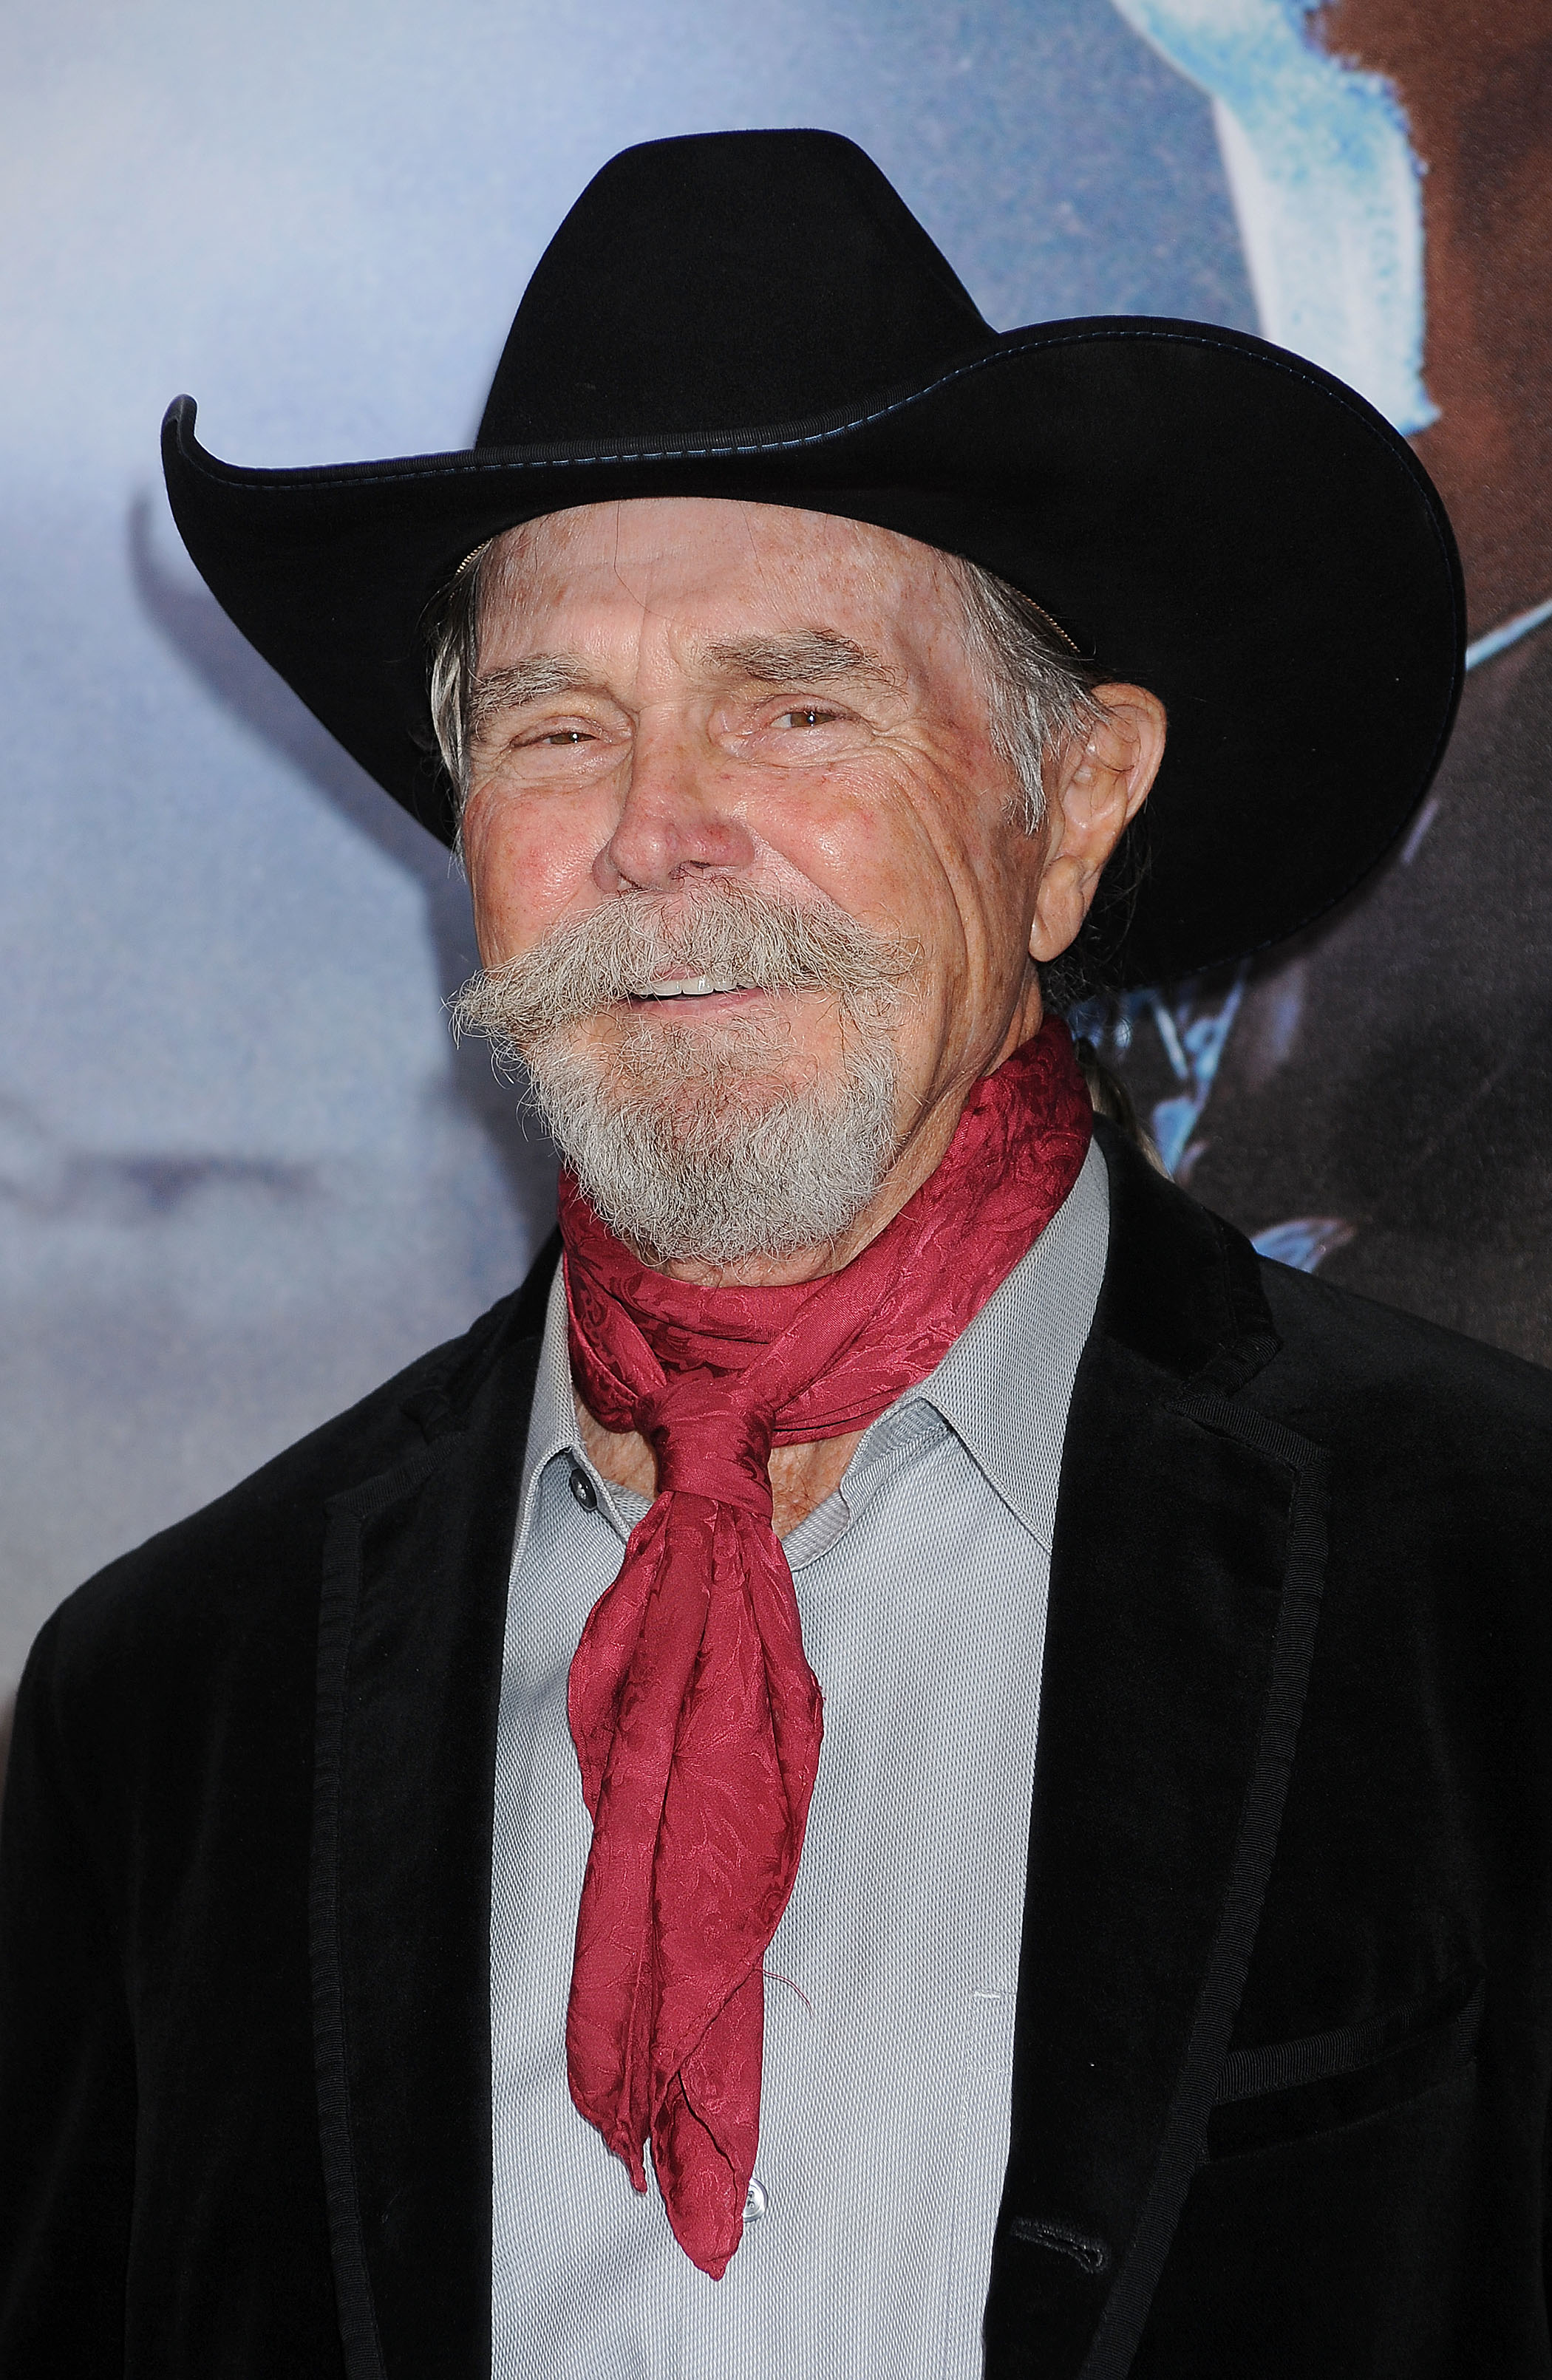 Buck Taylor in San Diego, California on July 23, 2011 | Source: Getty Images